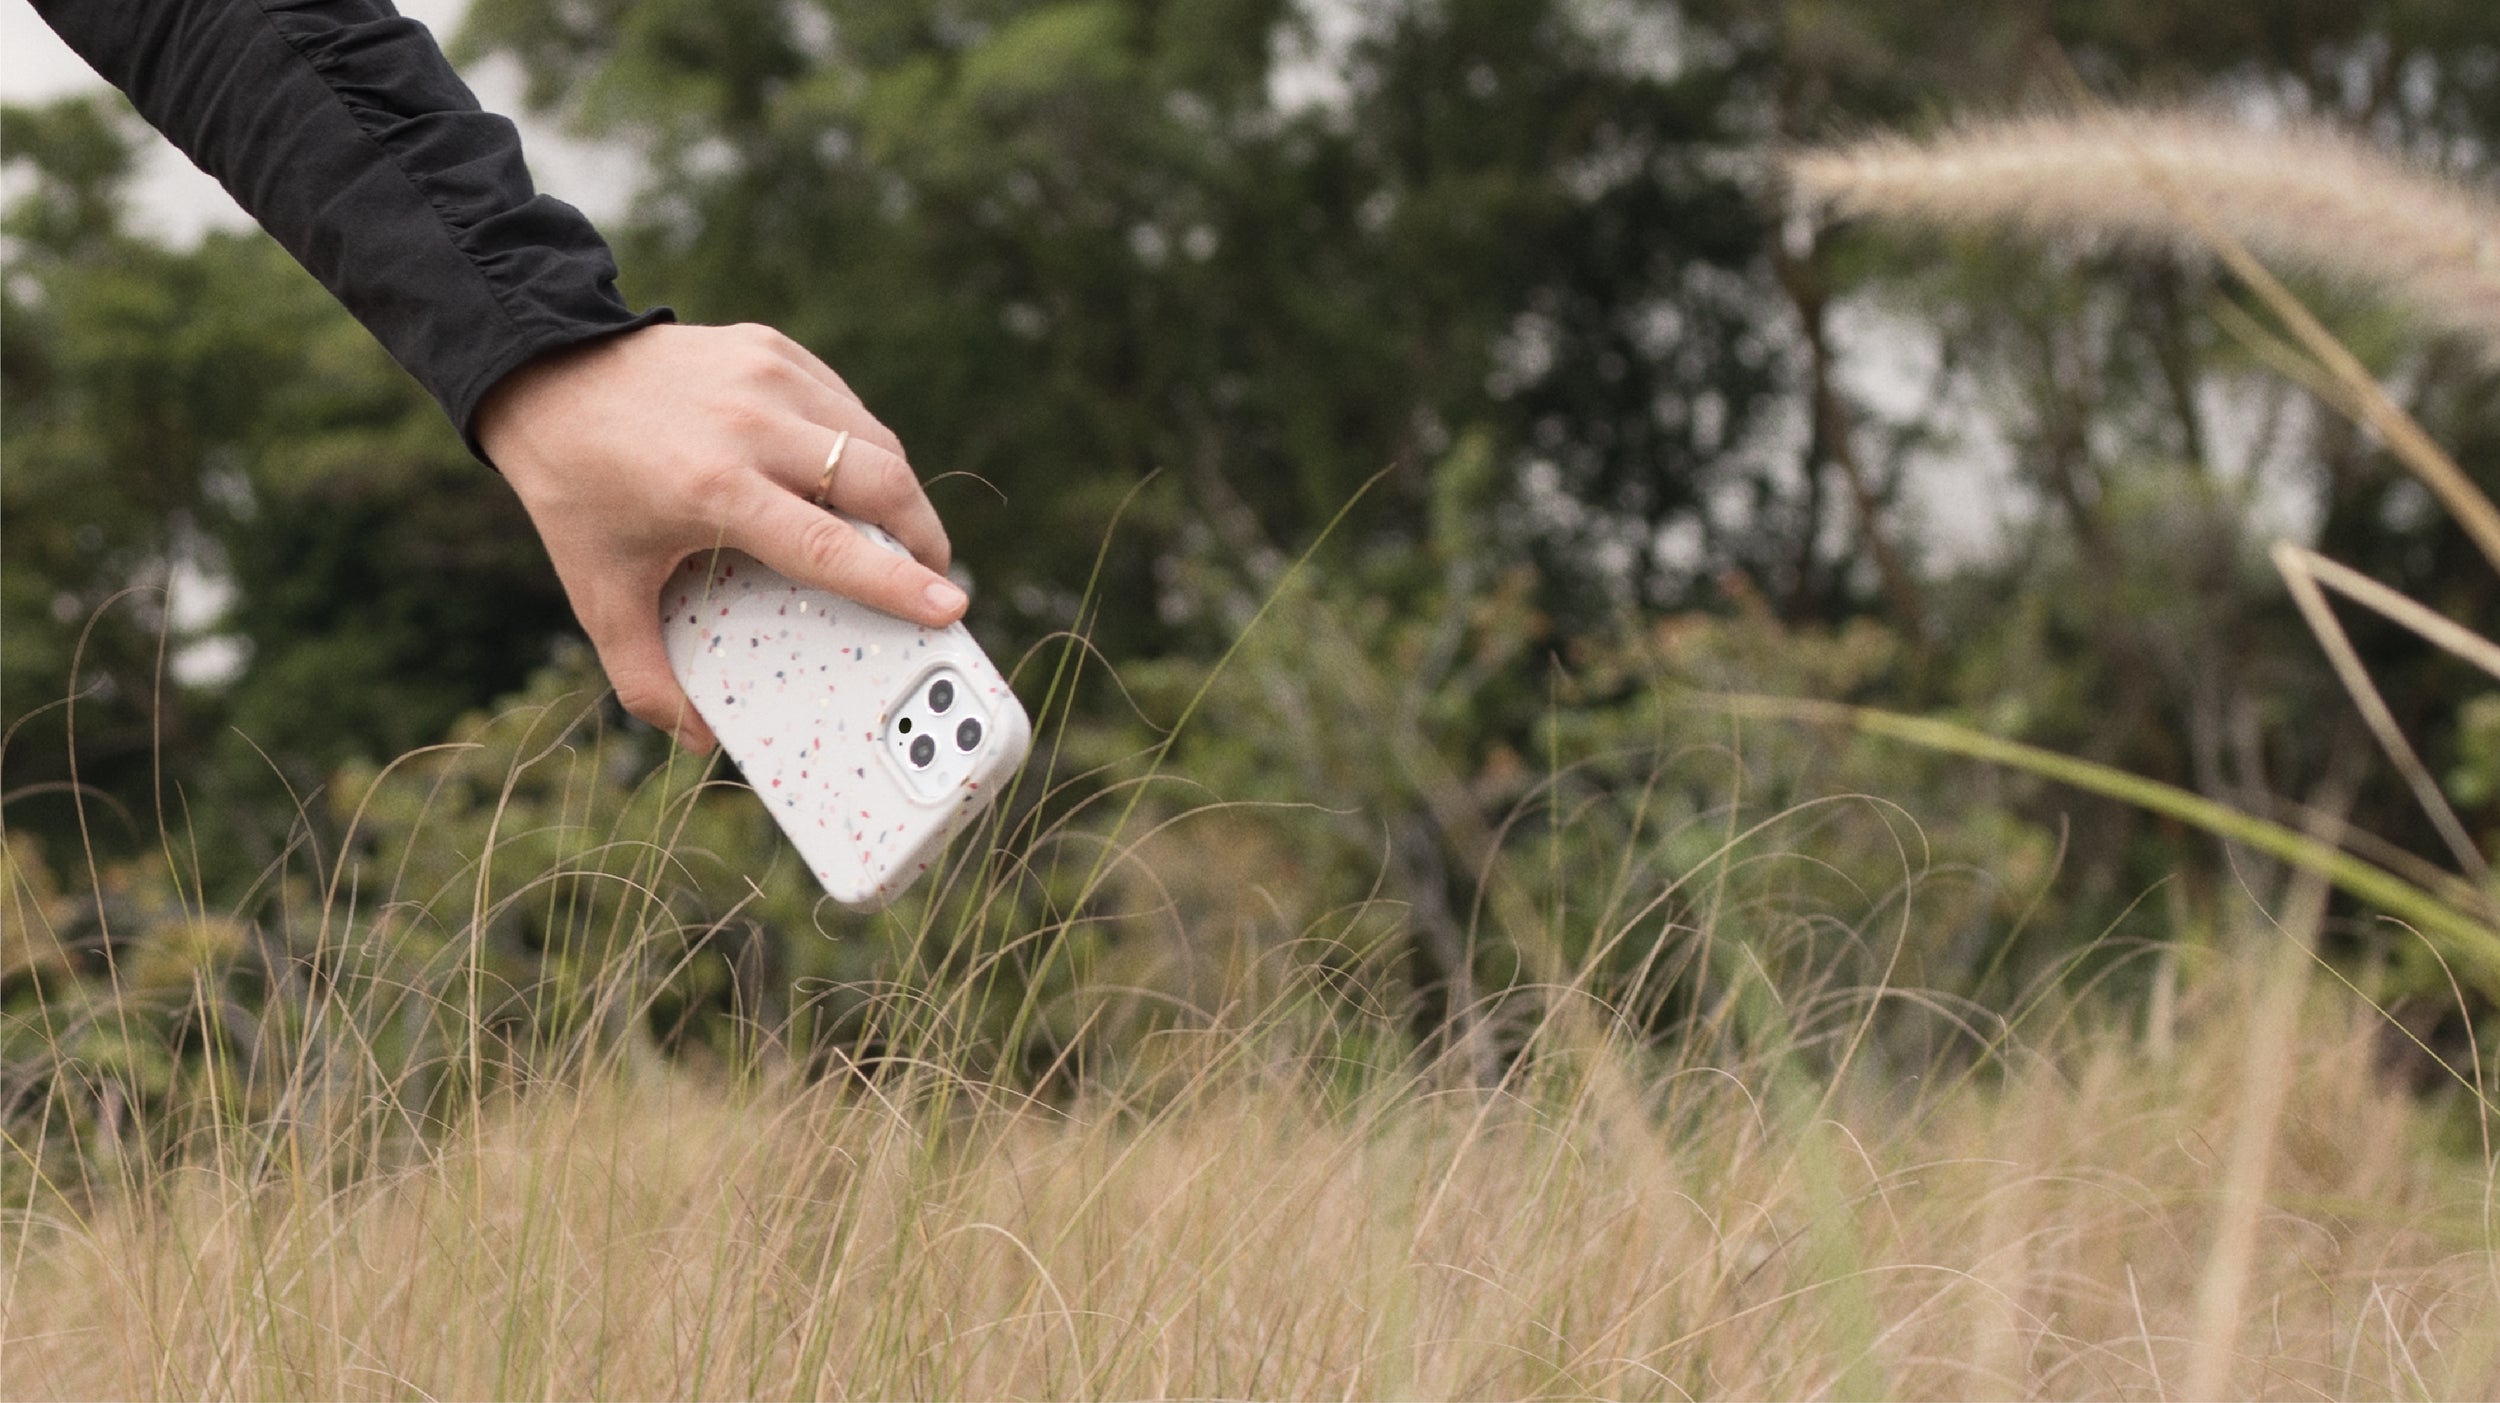 Hand holding speckled phone case in grassy field